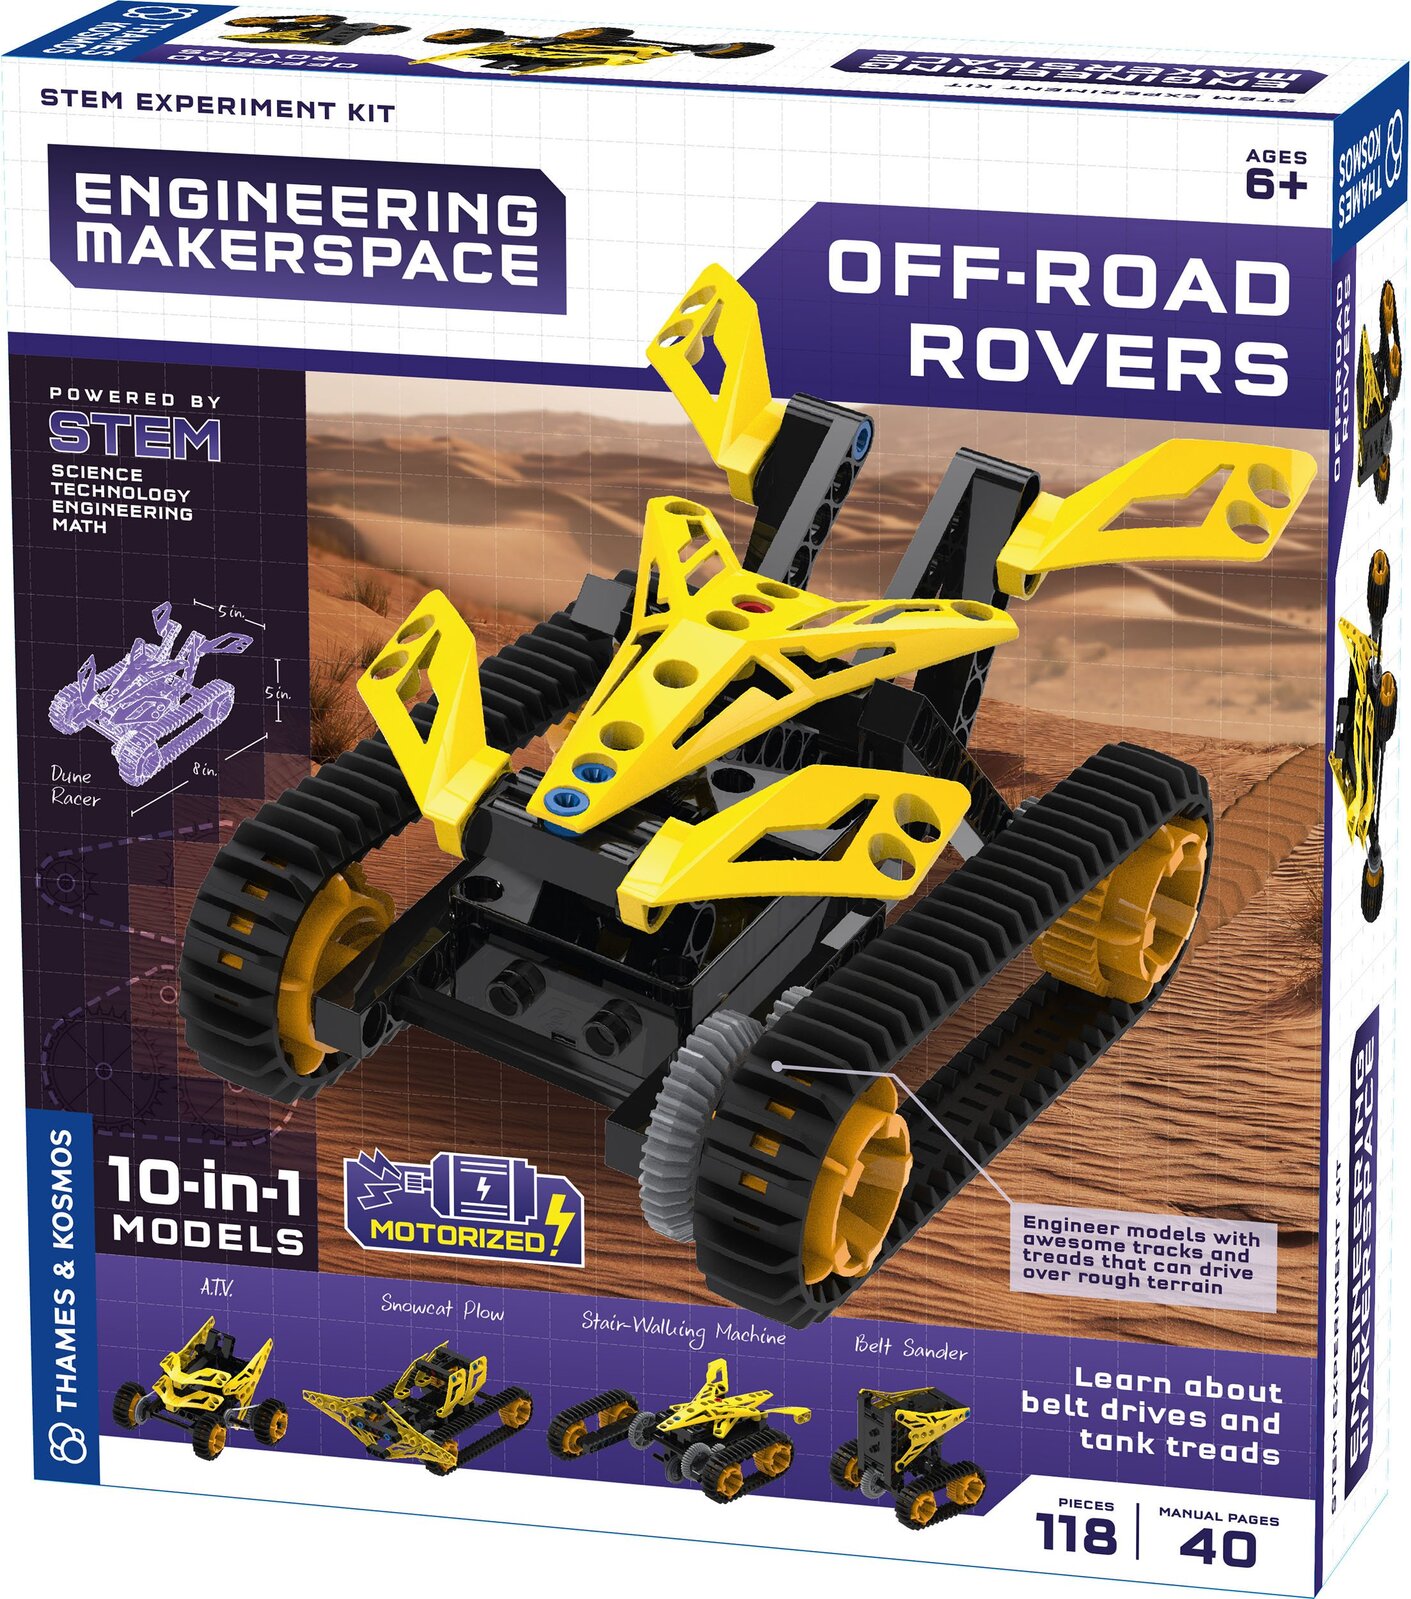 Off-road Rovers image